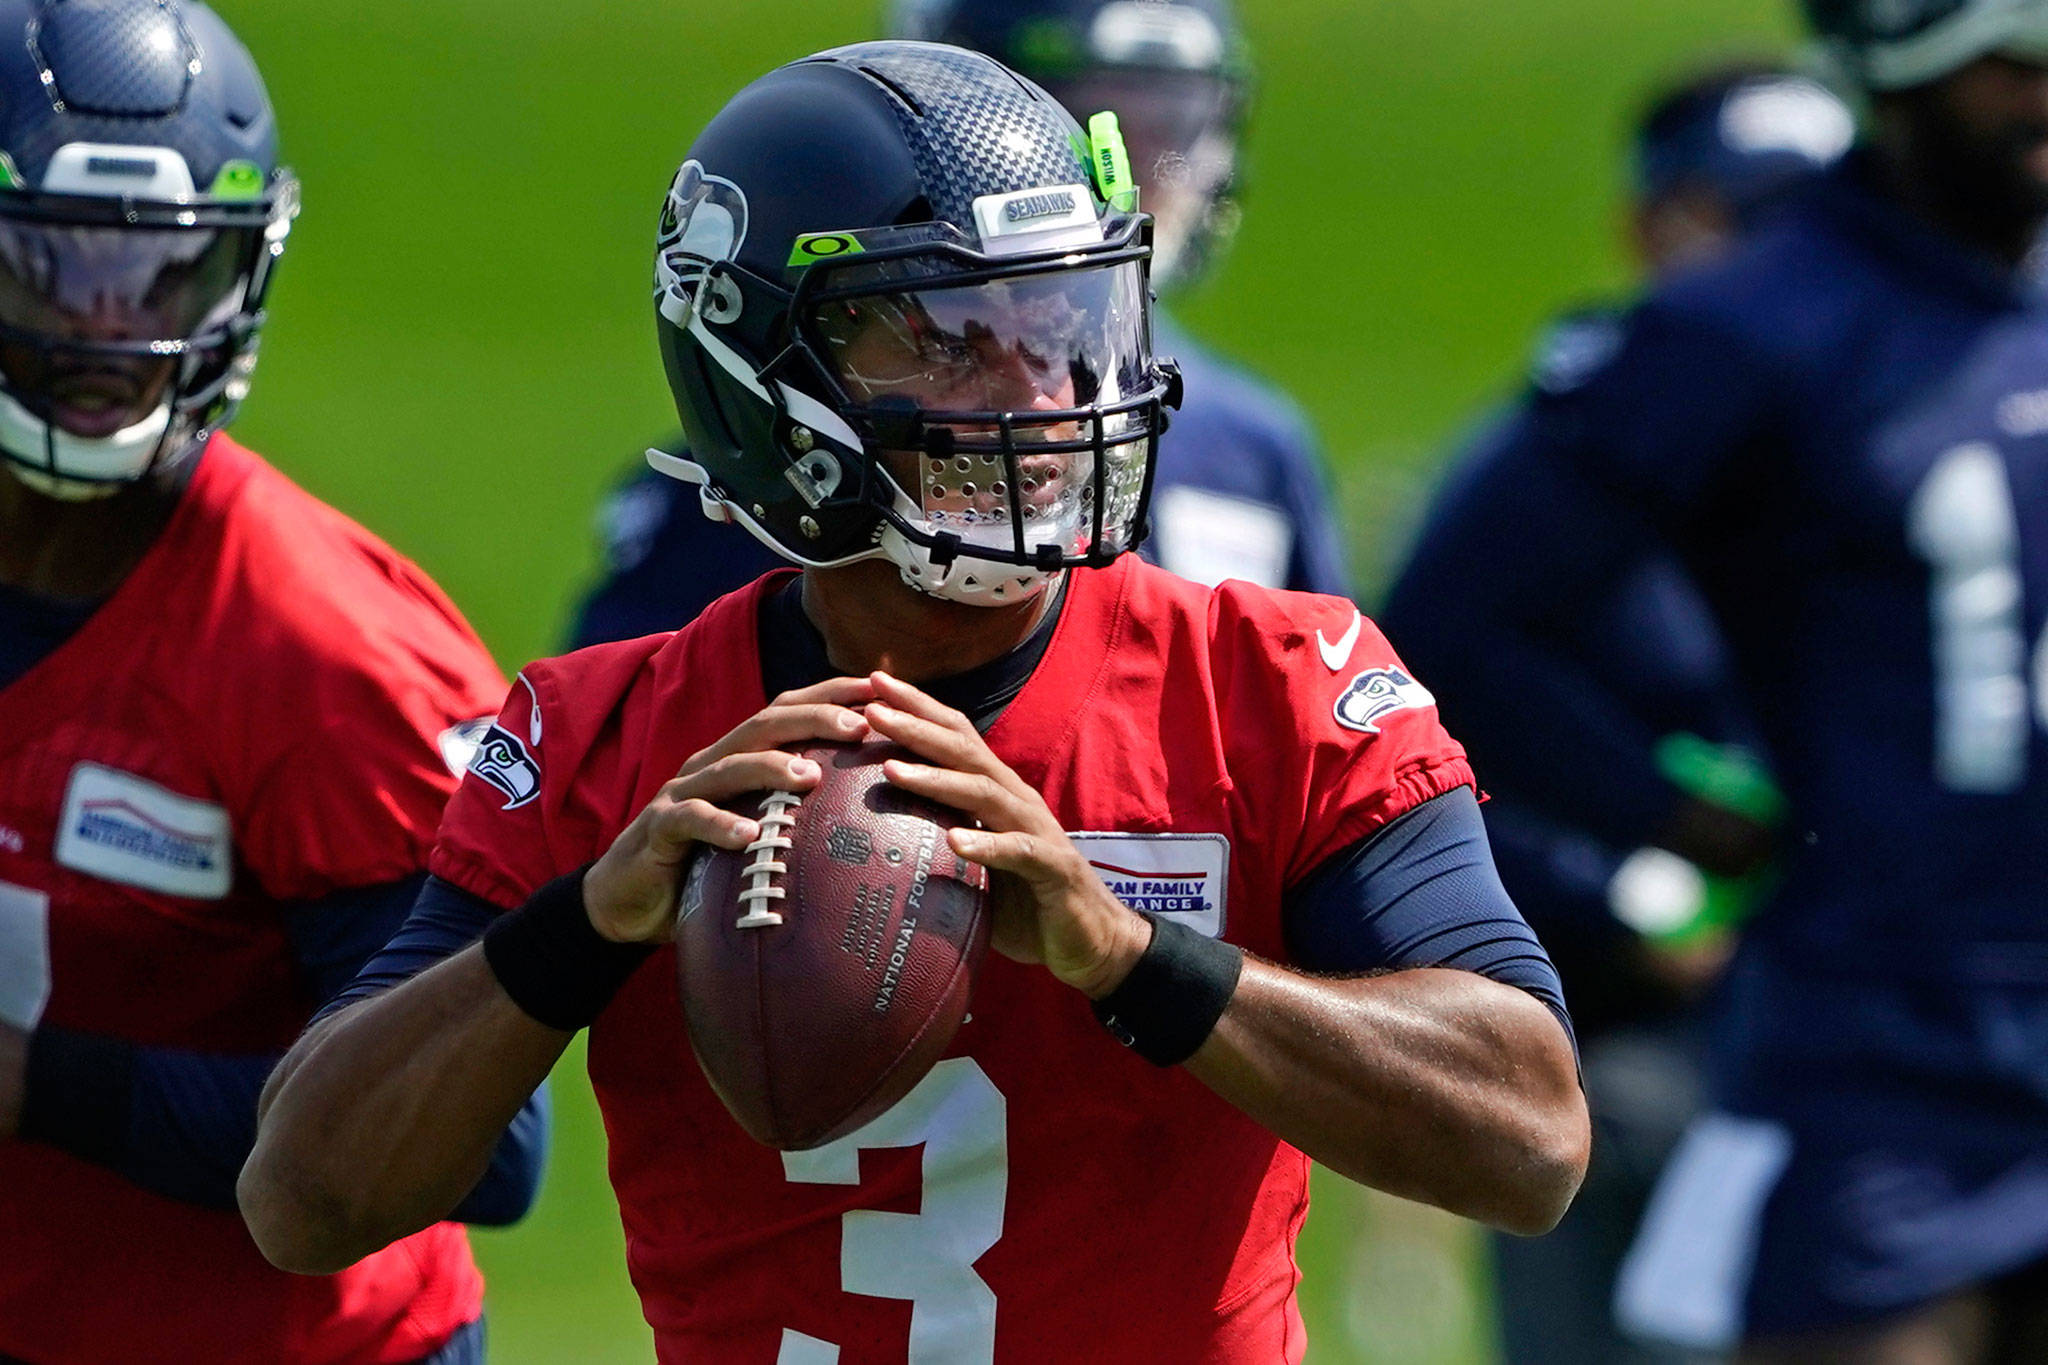 Seahawks quarterback Russell Wilson looks to pass during a training-camp practice Aug. 12, 2020, in Renton. (AP Photo/Ted S. Warren)